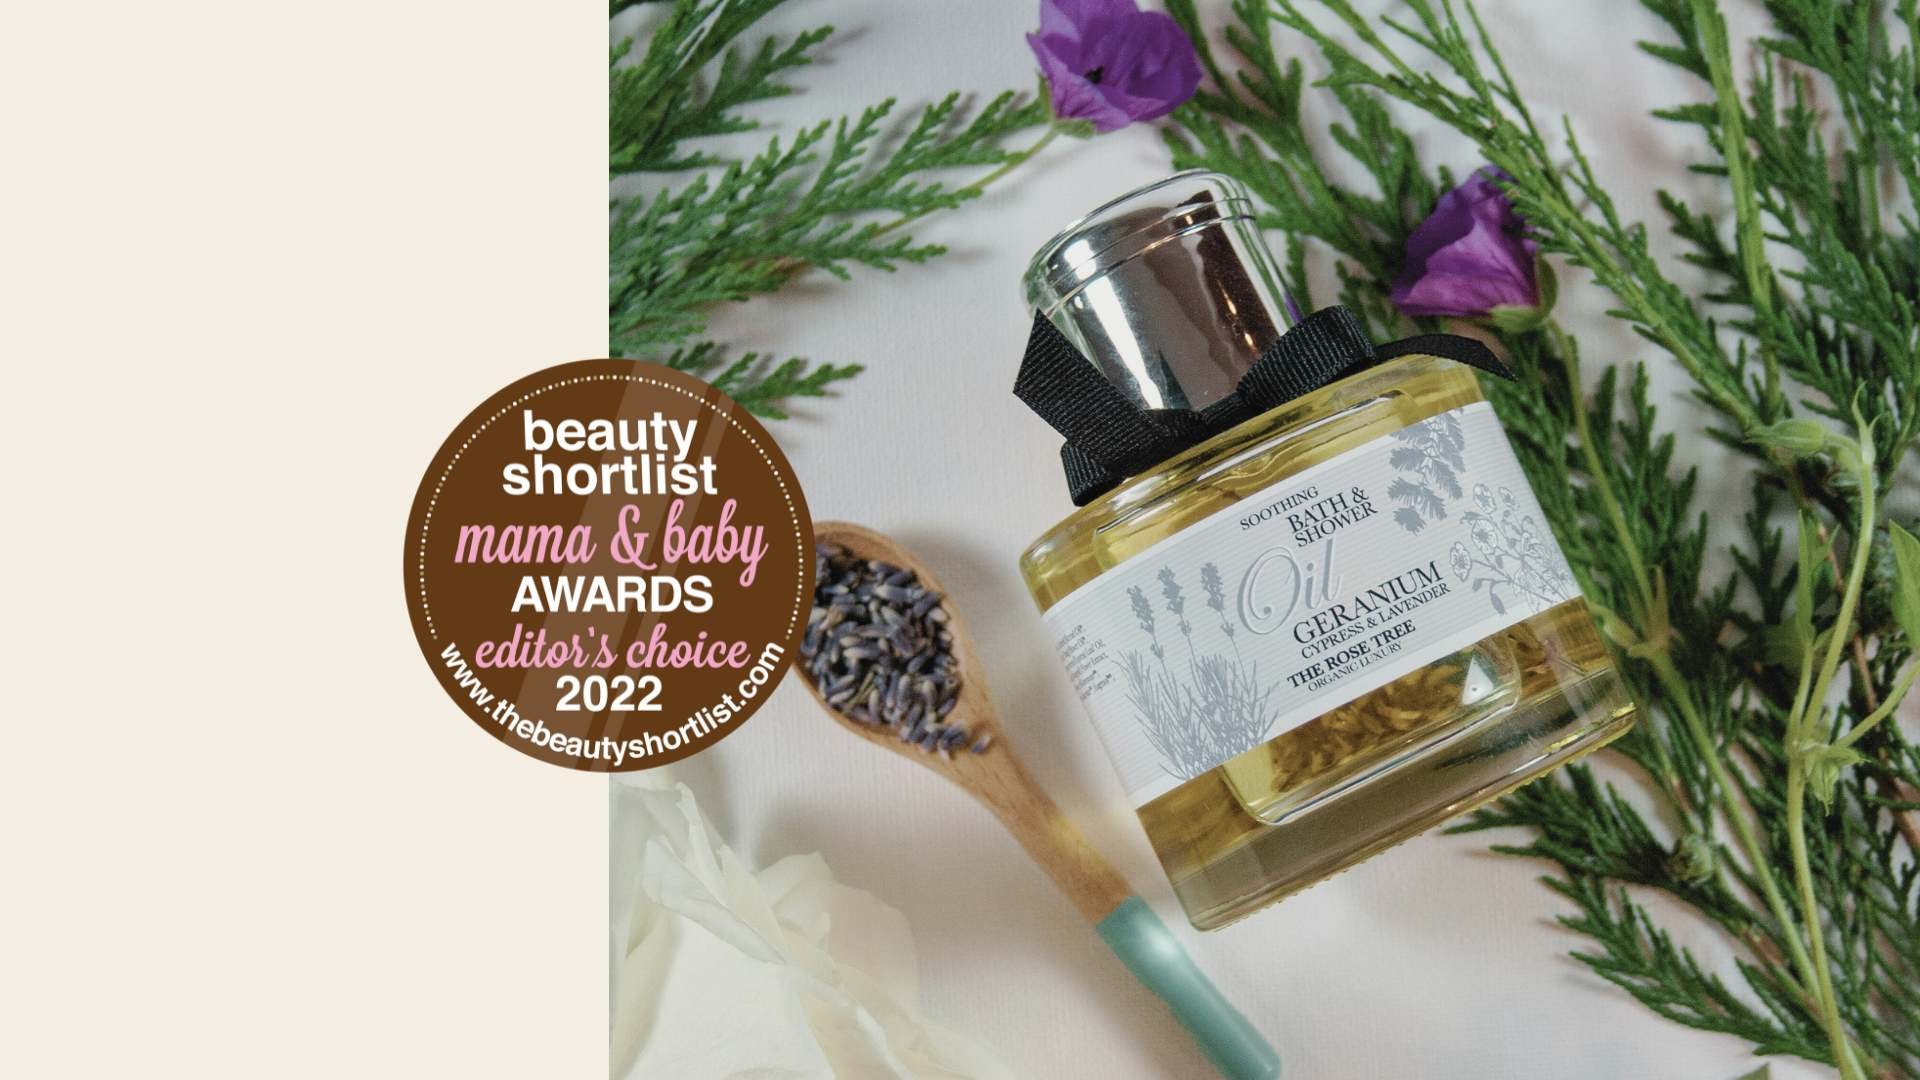 Soothing Bath Oil - Beauty Shortlist Awards 2022 | The Rose Tree